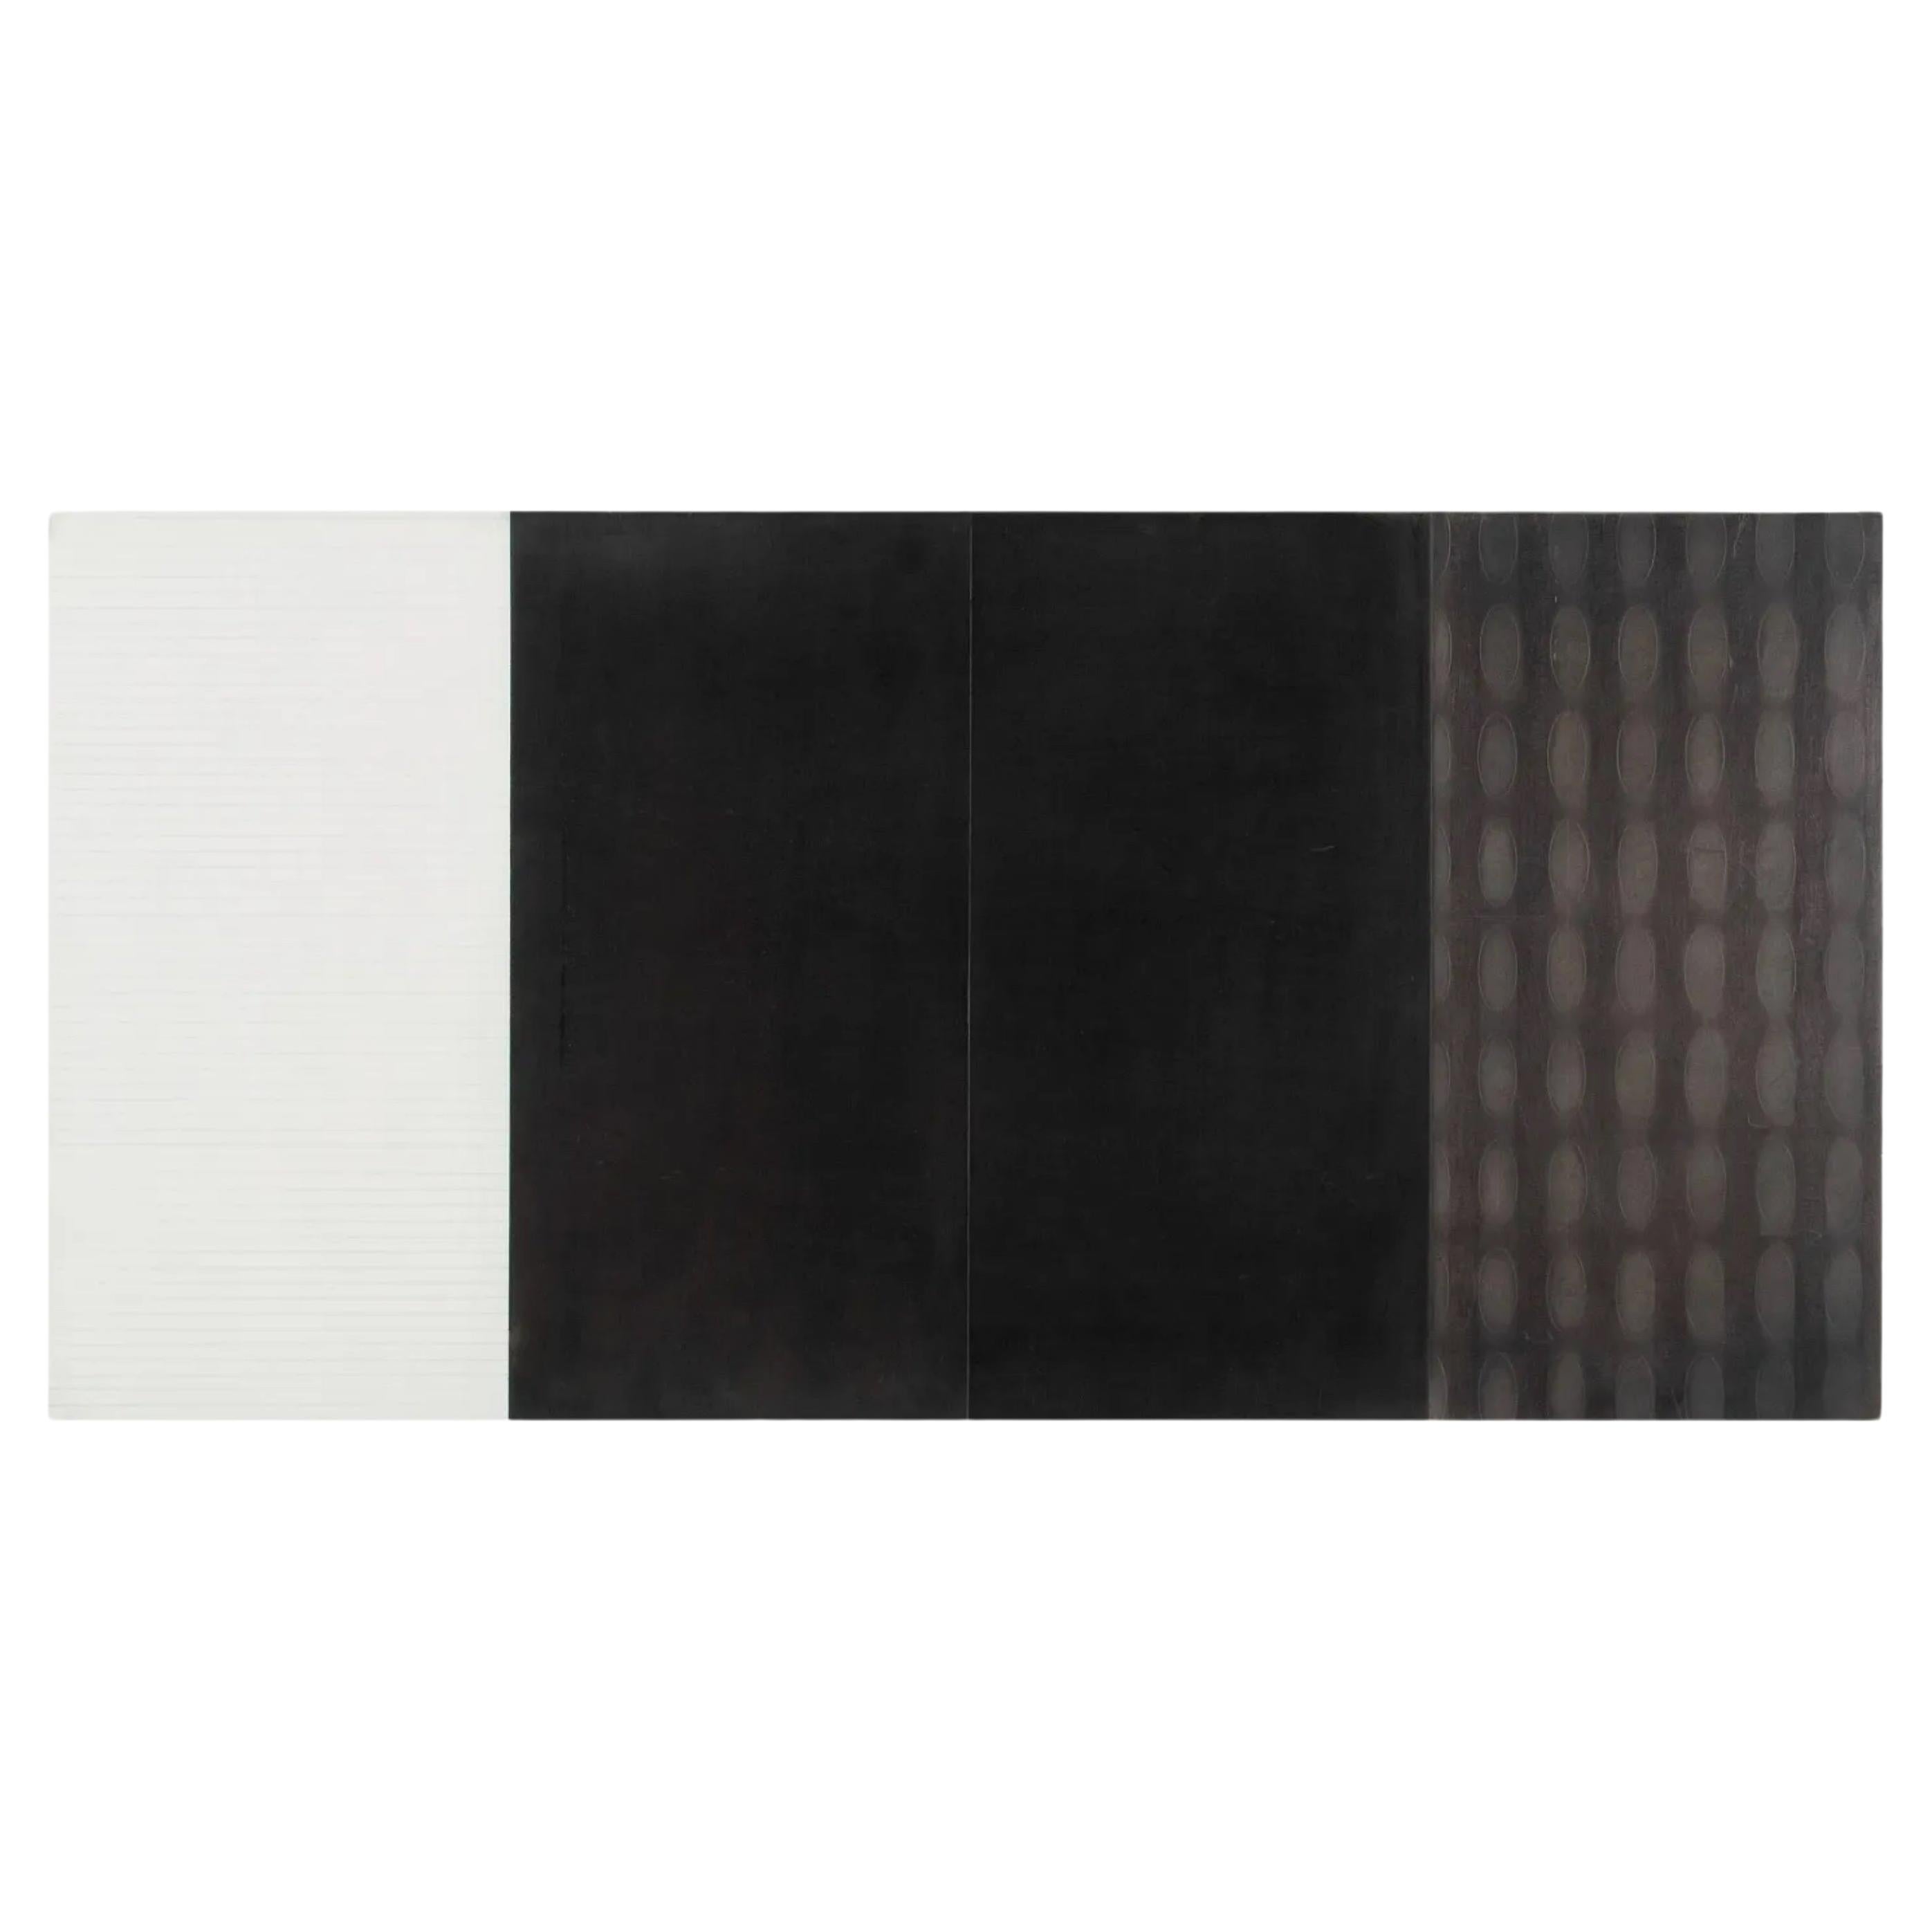 Greg Parker, Untitled, 1988; Graphite and Oil on Gessoed Panel For Sale